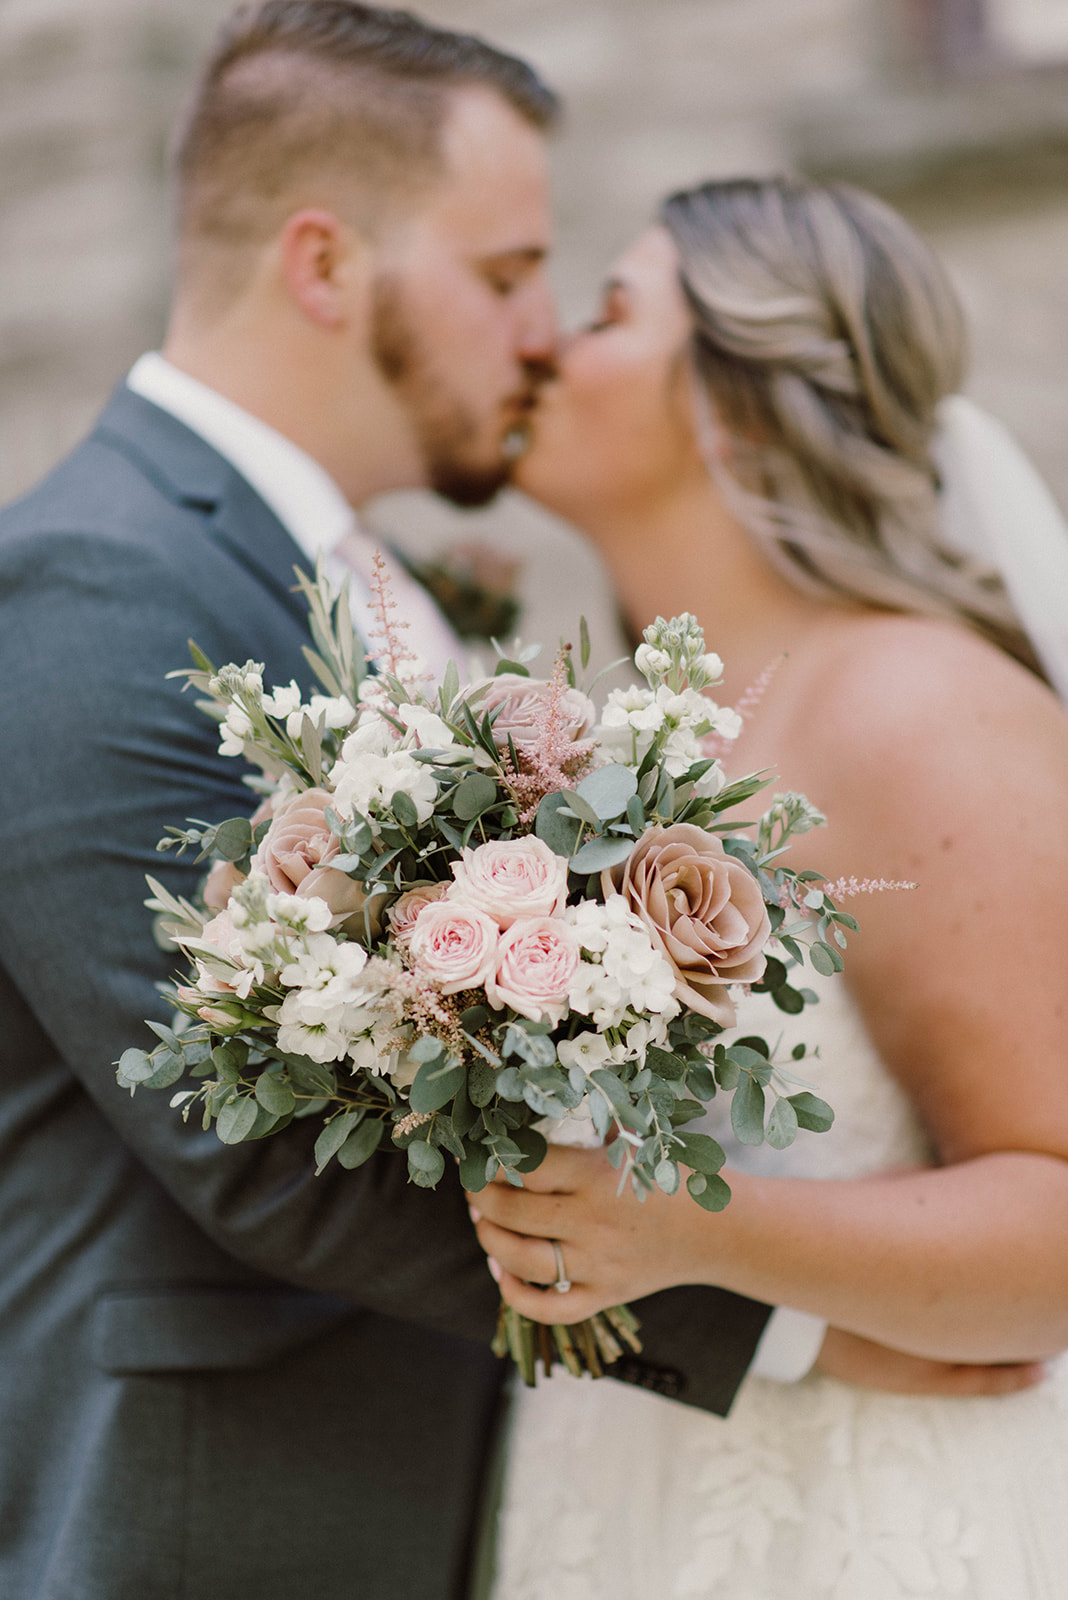 Floral-Reef-Designs-Ottawa-Wedding-and-Event-Florist-At-the-Schoolhouse-Wedding-2020-Rosielle-and-Co-Paige-Jamie-Wedding-55